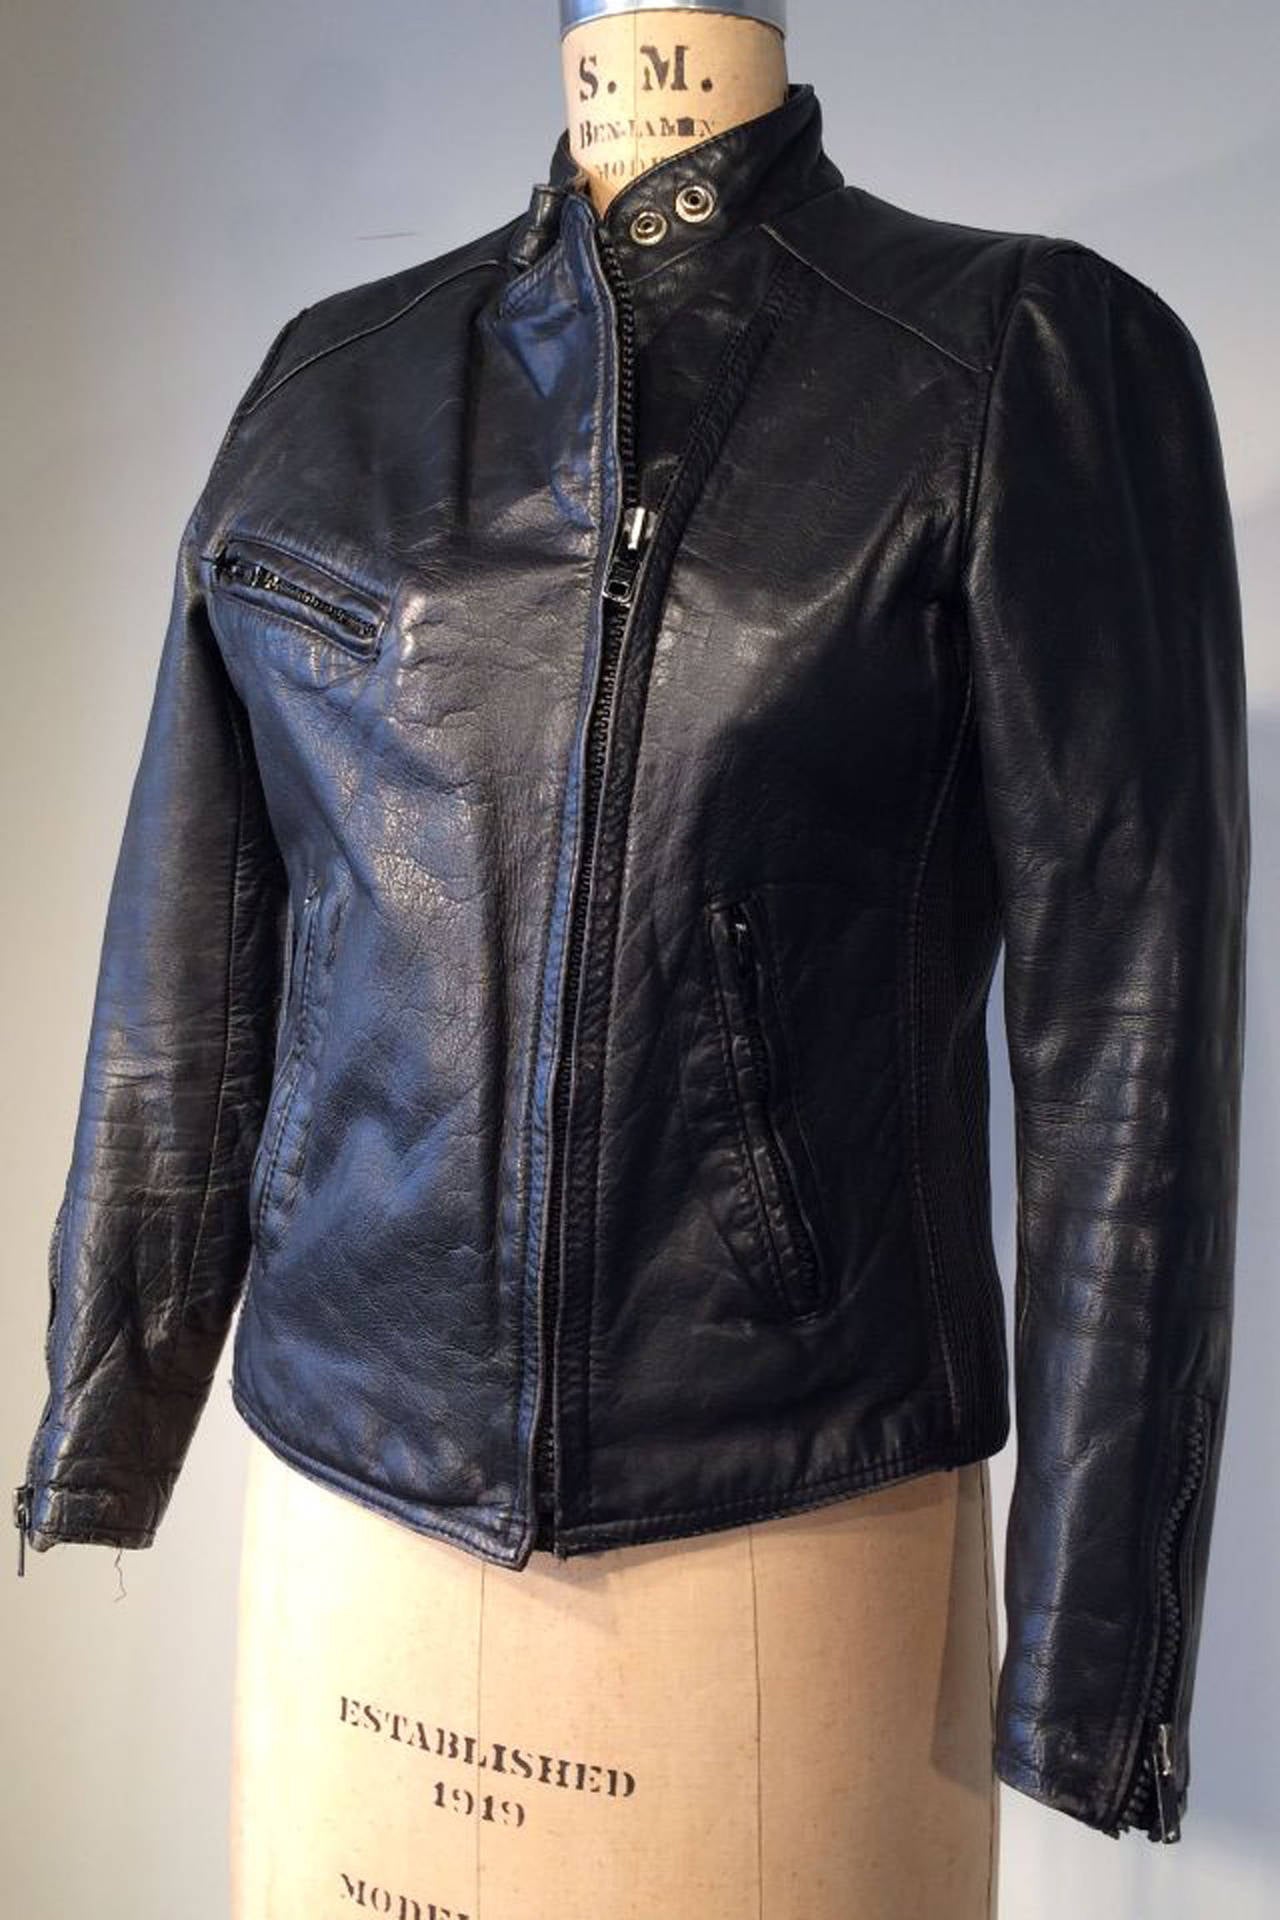 A fine vintage Hein Gericke for AMF/Harley-Davidson black leather cafe racer/motorcycle jacket. Top grade black leather item fully lined with zipper and snap closures. Honest item in excellent condition.